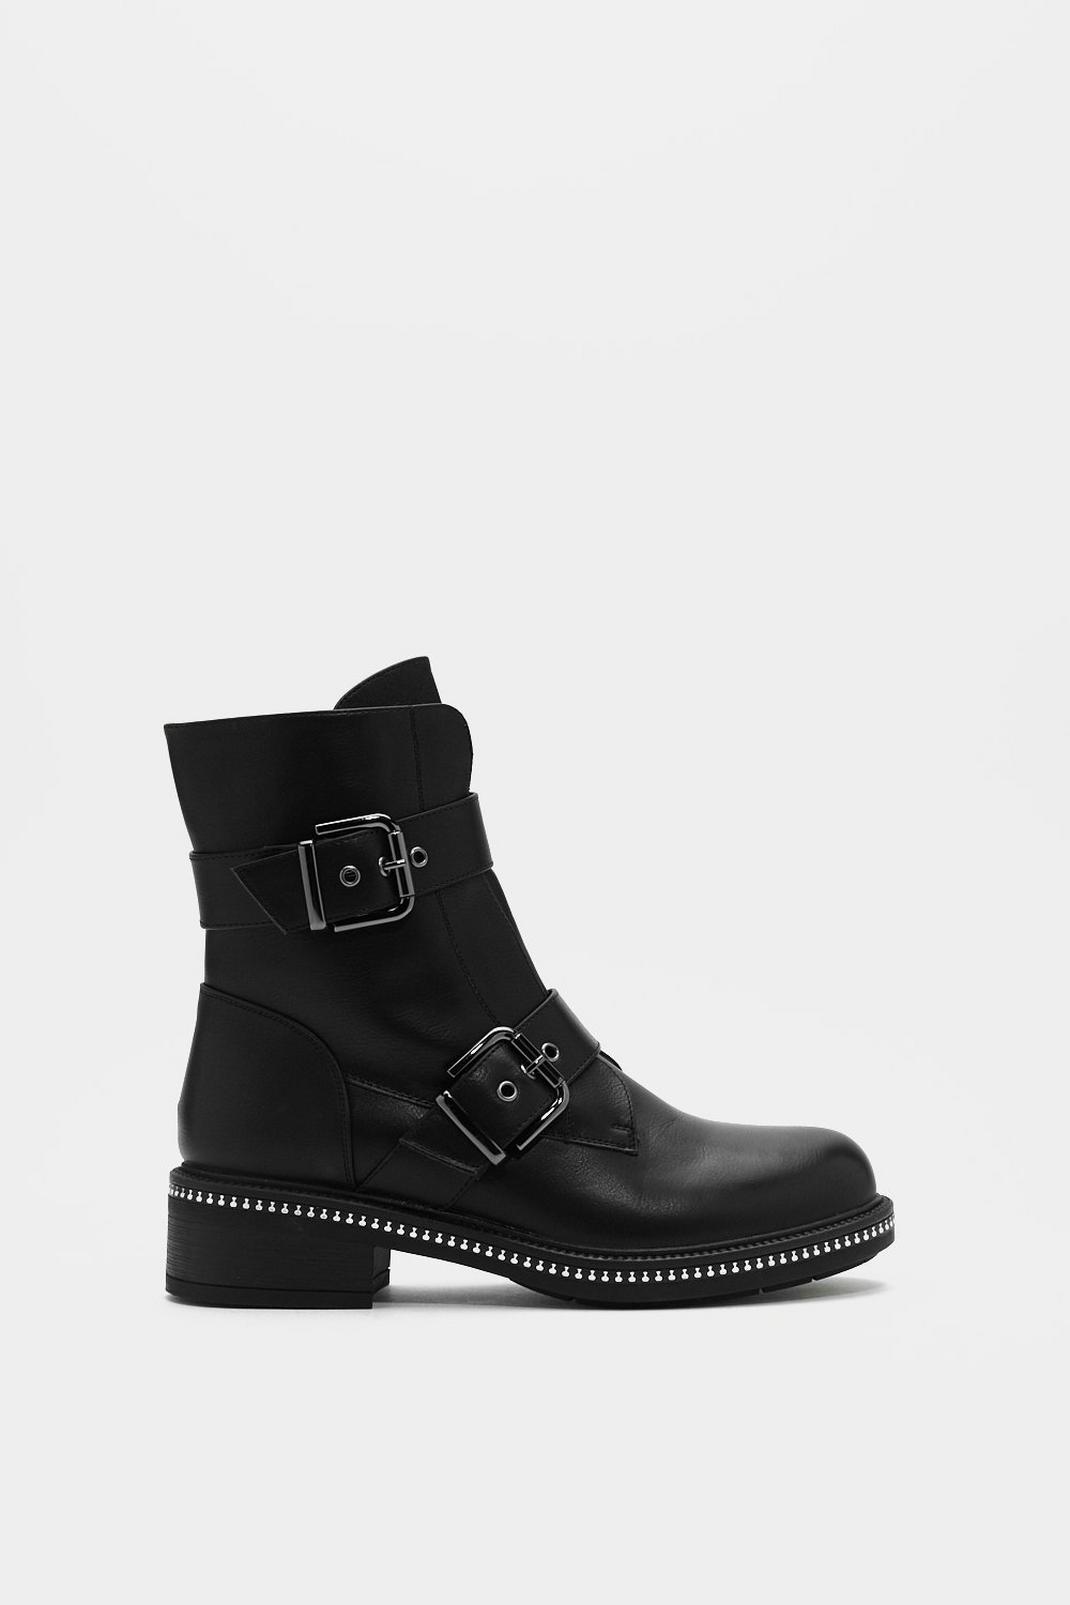 On the Double Buckle Boot | Nasty Gal